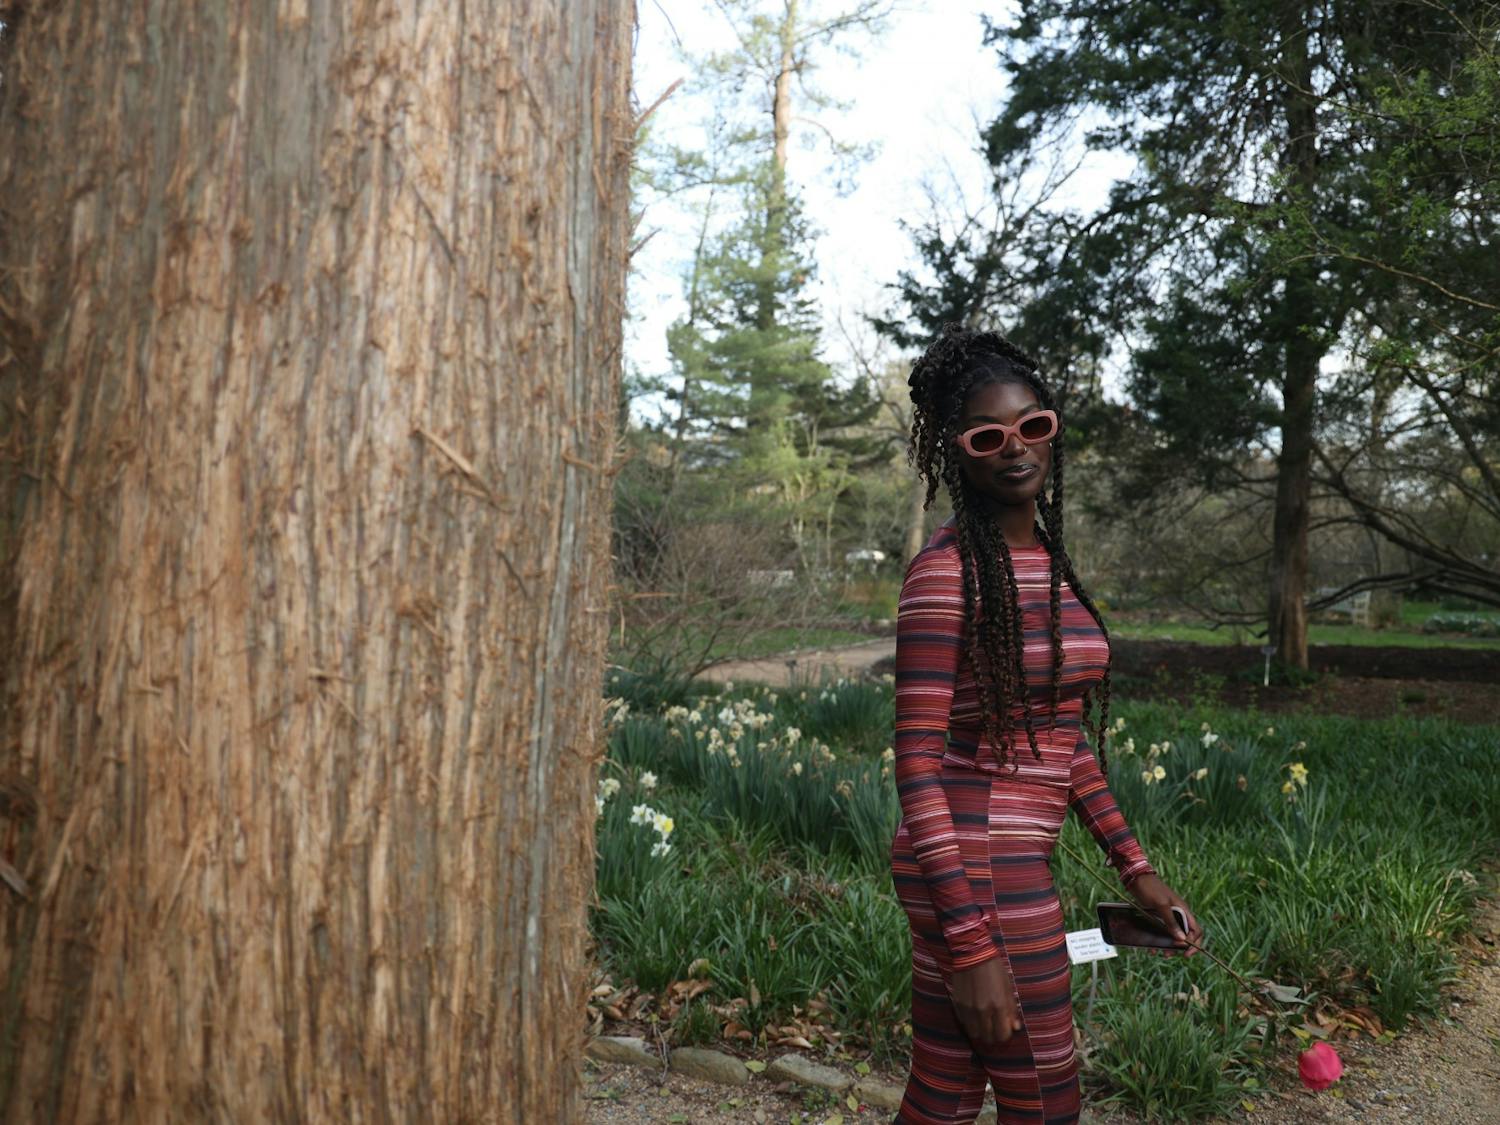 UNC sophomore Jaziah Planter shows off her pink sunglasses and outfit in Coker Arboretum on Friday, March 20, 2023.